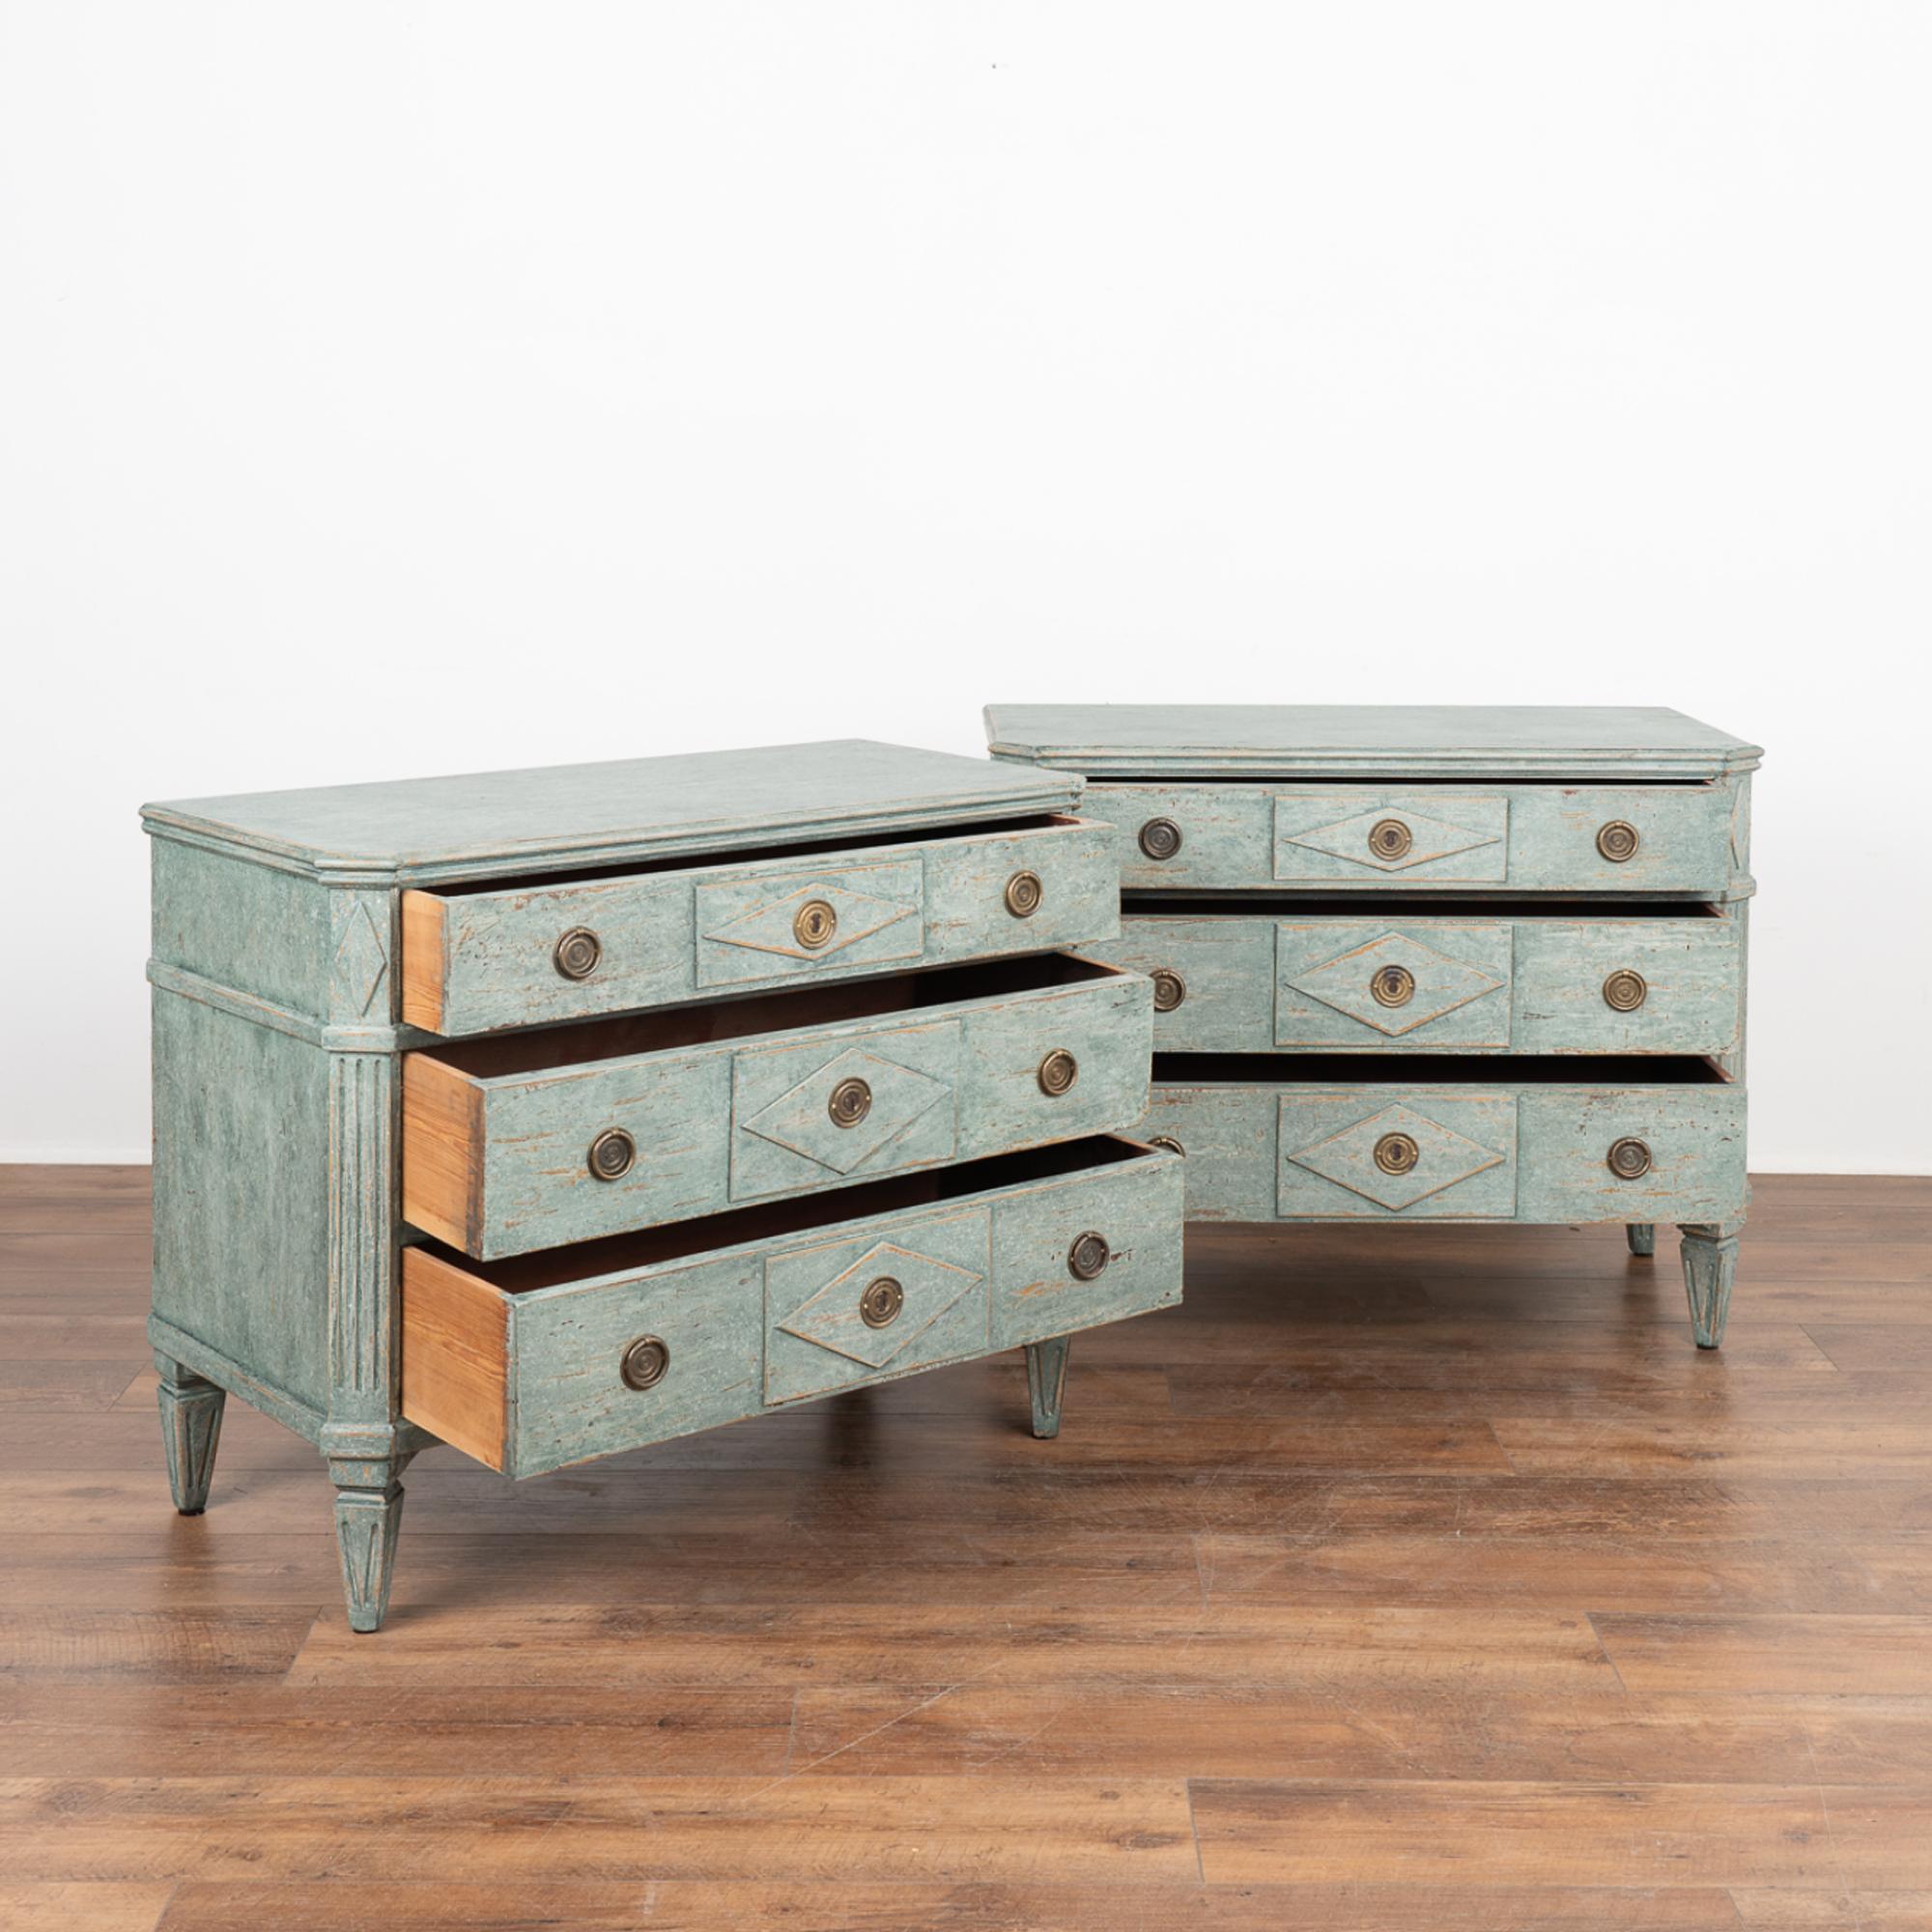 Swedish Pair, Gustavian Blue Painted Chest of Drawers, Sweden circa 1860-80